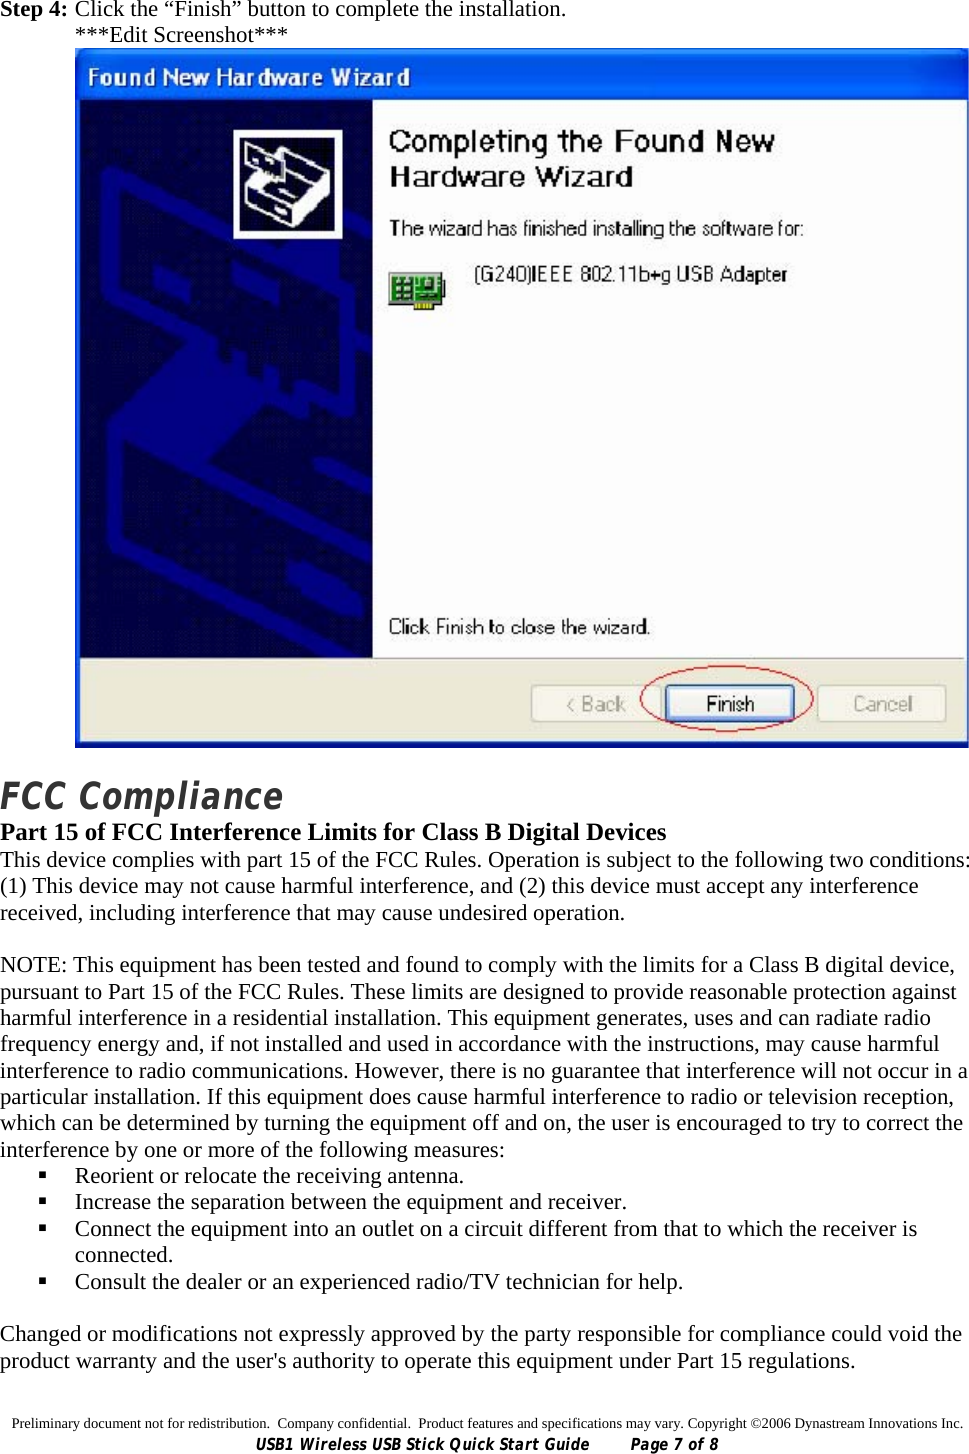 Preliminary document not for redistribution.  Company confidential.  Product features and specifications may vary. Copyright ©2006 Dynastream Innovations Inc. USB1 Wireless USB Stick Quick Start Guide  Page 7 of 8 Step 4: Click the “Finish” button to complete the installation. ***Edit Screenshot***   FCC Compliance Part 15 of FCC Interference Limits for Class B Digital Devices This device complies with part 15 of the FCC Rules. Operation is subject to the following two conditions: (1) This device may not cause harmful interference, and (2) this device must accept any interference received, including interference that may cause undesired operation.  NOTE: This equipment has been tested and found to comply with the limits for a Class B digital device, pursuant to Part 15 of the FCC Rules. These limits are designed to provide reasonable protection against harmful interference in a residential installation. This equipment generates, uses and can radiate radio frequency energy and, if not installed and used in accordance with the instructions, may cause harmful interference to radio communications. However, there is no guarantee that interference will not occur in a particular installation. If this equipment does cause harmful interference to radio or television reception, which can be determined by turning the equipment off and on, the user is encouraged to try to correct the interference by one or more of the following measures:  Reorient or relocate the receiving antenna.  Increase the separation between the equipment and receiver.  Connect the equipment into an outlet on a circuit different from that to which the receiver is connected.  Consult the dealer or an experienced radio/TV technician for help.  Changed or modifications not expressly approved by the party responsible for compliance could void the product warranty and the user&apos;s authority to operate this equipment under Part 15 regulations. 